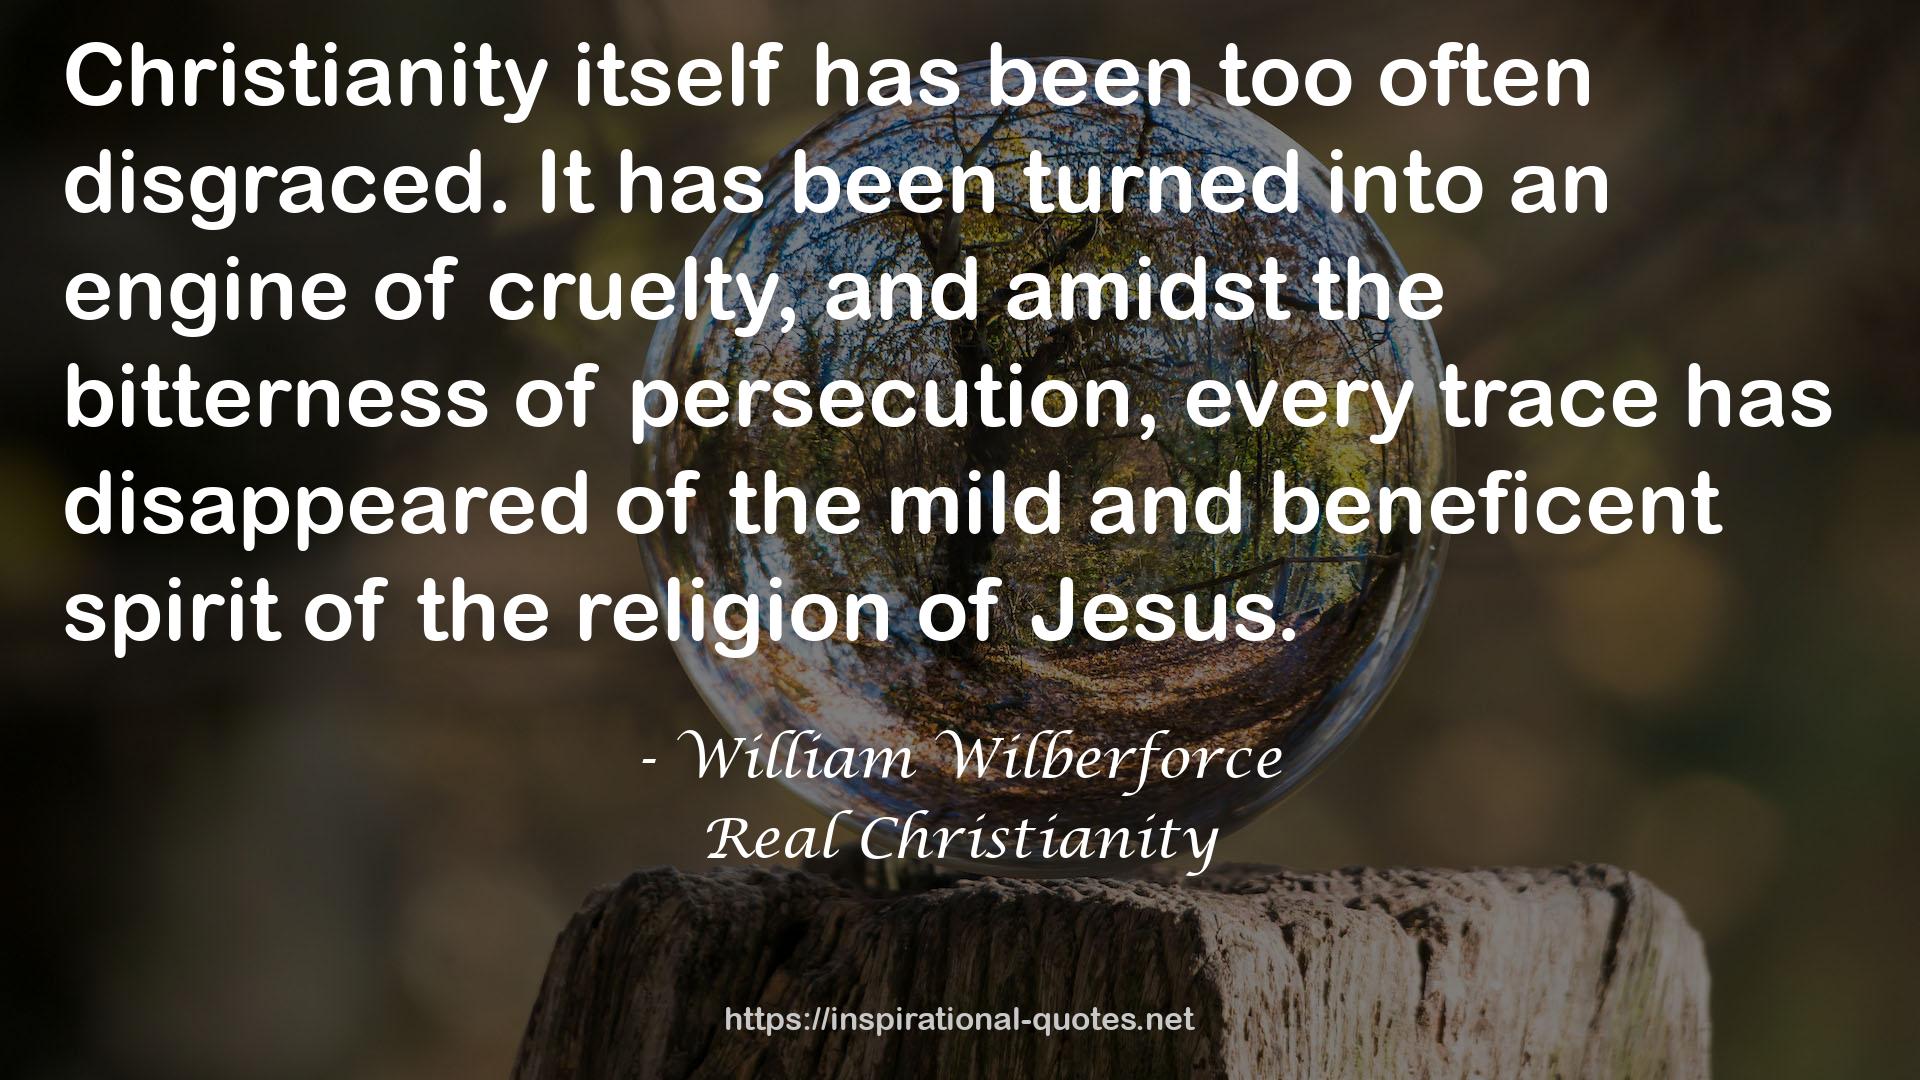 Real Christianity QUOTES